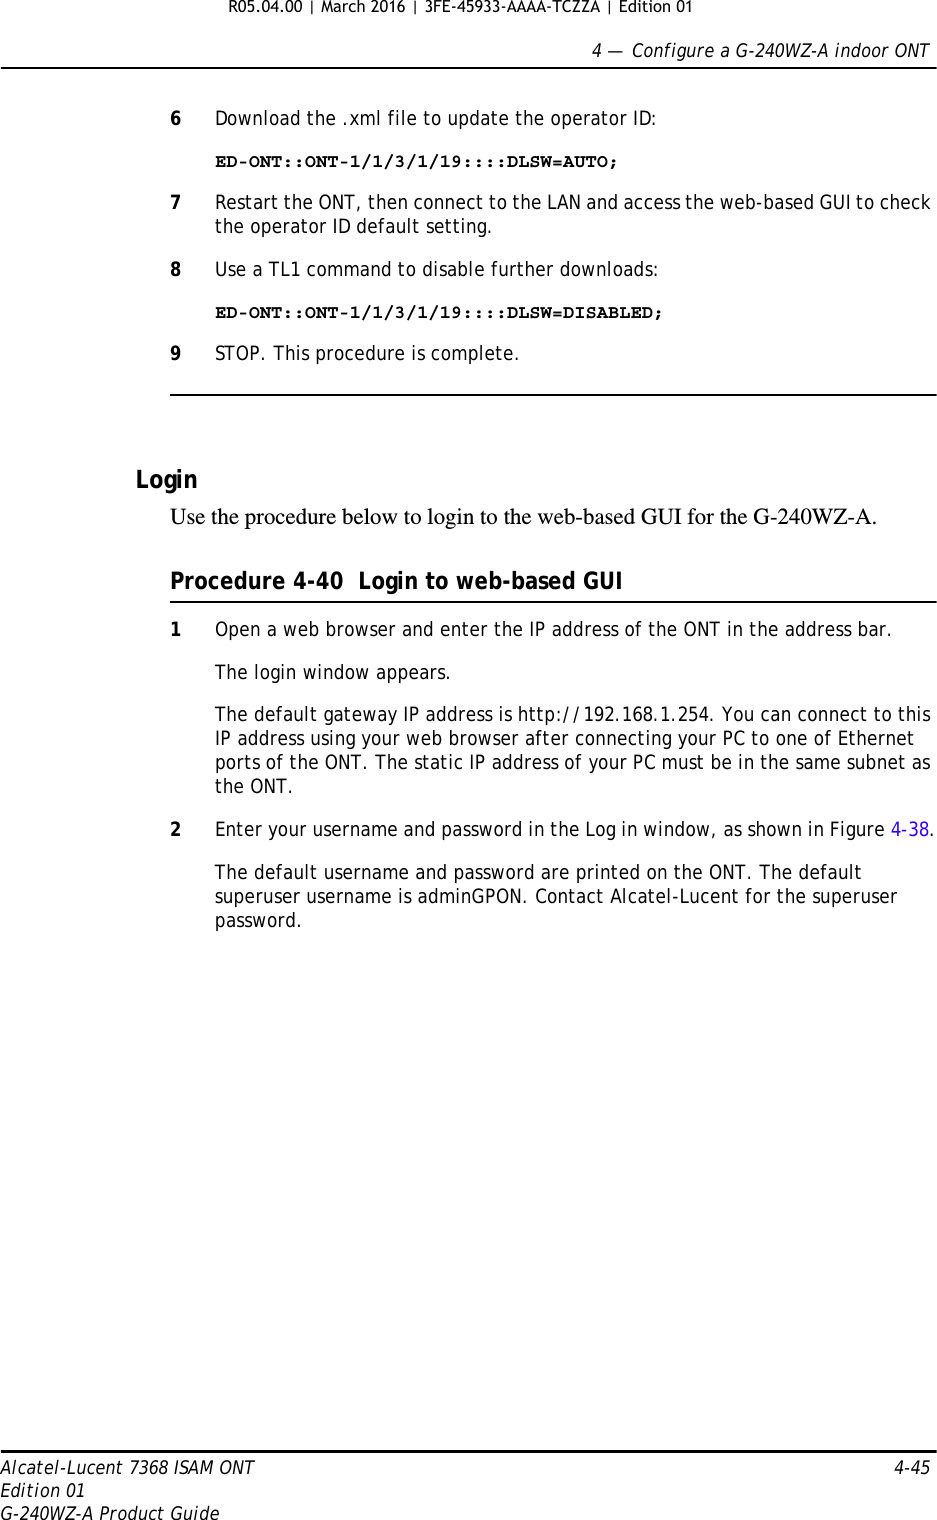 4 —  Configure a G-240WZ-A indoor ONTAlcatel-Lucent 7368 ISAM ONT 4-45Edition 01G-240WZ-A Product Guide6Download the .xml file to update the operator ID:ED-ONT::ONT-1/1/3/1/19::::DLSW=AUTO;7Restart the ONT, then connect to the LAN and access the web-based GUI to check the operator ID default setting.8Use a TL1 command to disable further downloads:ED-ONT::ONT-1/1/3/1/19::::DLSW=DISABLED;9STOP. This procedure is complete.LoginUse the procedure below to login to the web-based GUI for the G-240WZ-A.Procedure 4-40  Login to web-based GUI1Open a web browser and enter the IP address of the ONT in the address bar.The login window appears. The default gateway IP address is http://192.168.1.254. You can connect to this IP address using your web browser after connecting your PC to one of Ethernet ports of the ONT. The static IP address of your PC must be in the same subnet as the ONT.2Enter your username and password in the Log in window, as shown in Figure 4-38.The default username and password are printed on the ONT. The default superuser username is adminGPON. Contact Alcatel-Lucent for the superuser password.R05.04.00 | March 2016 | 3FE-45933-AAAA-TCZZA | Edition 01 